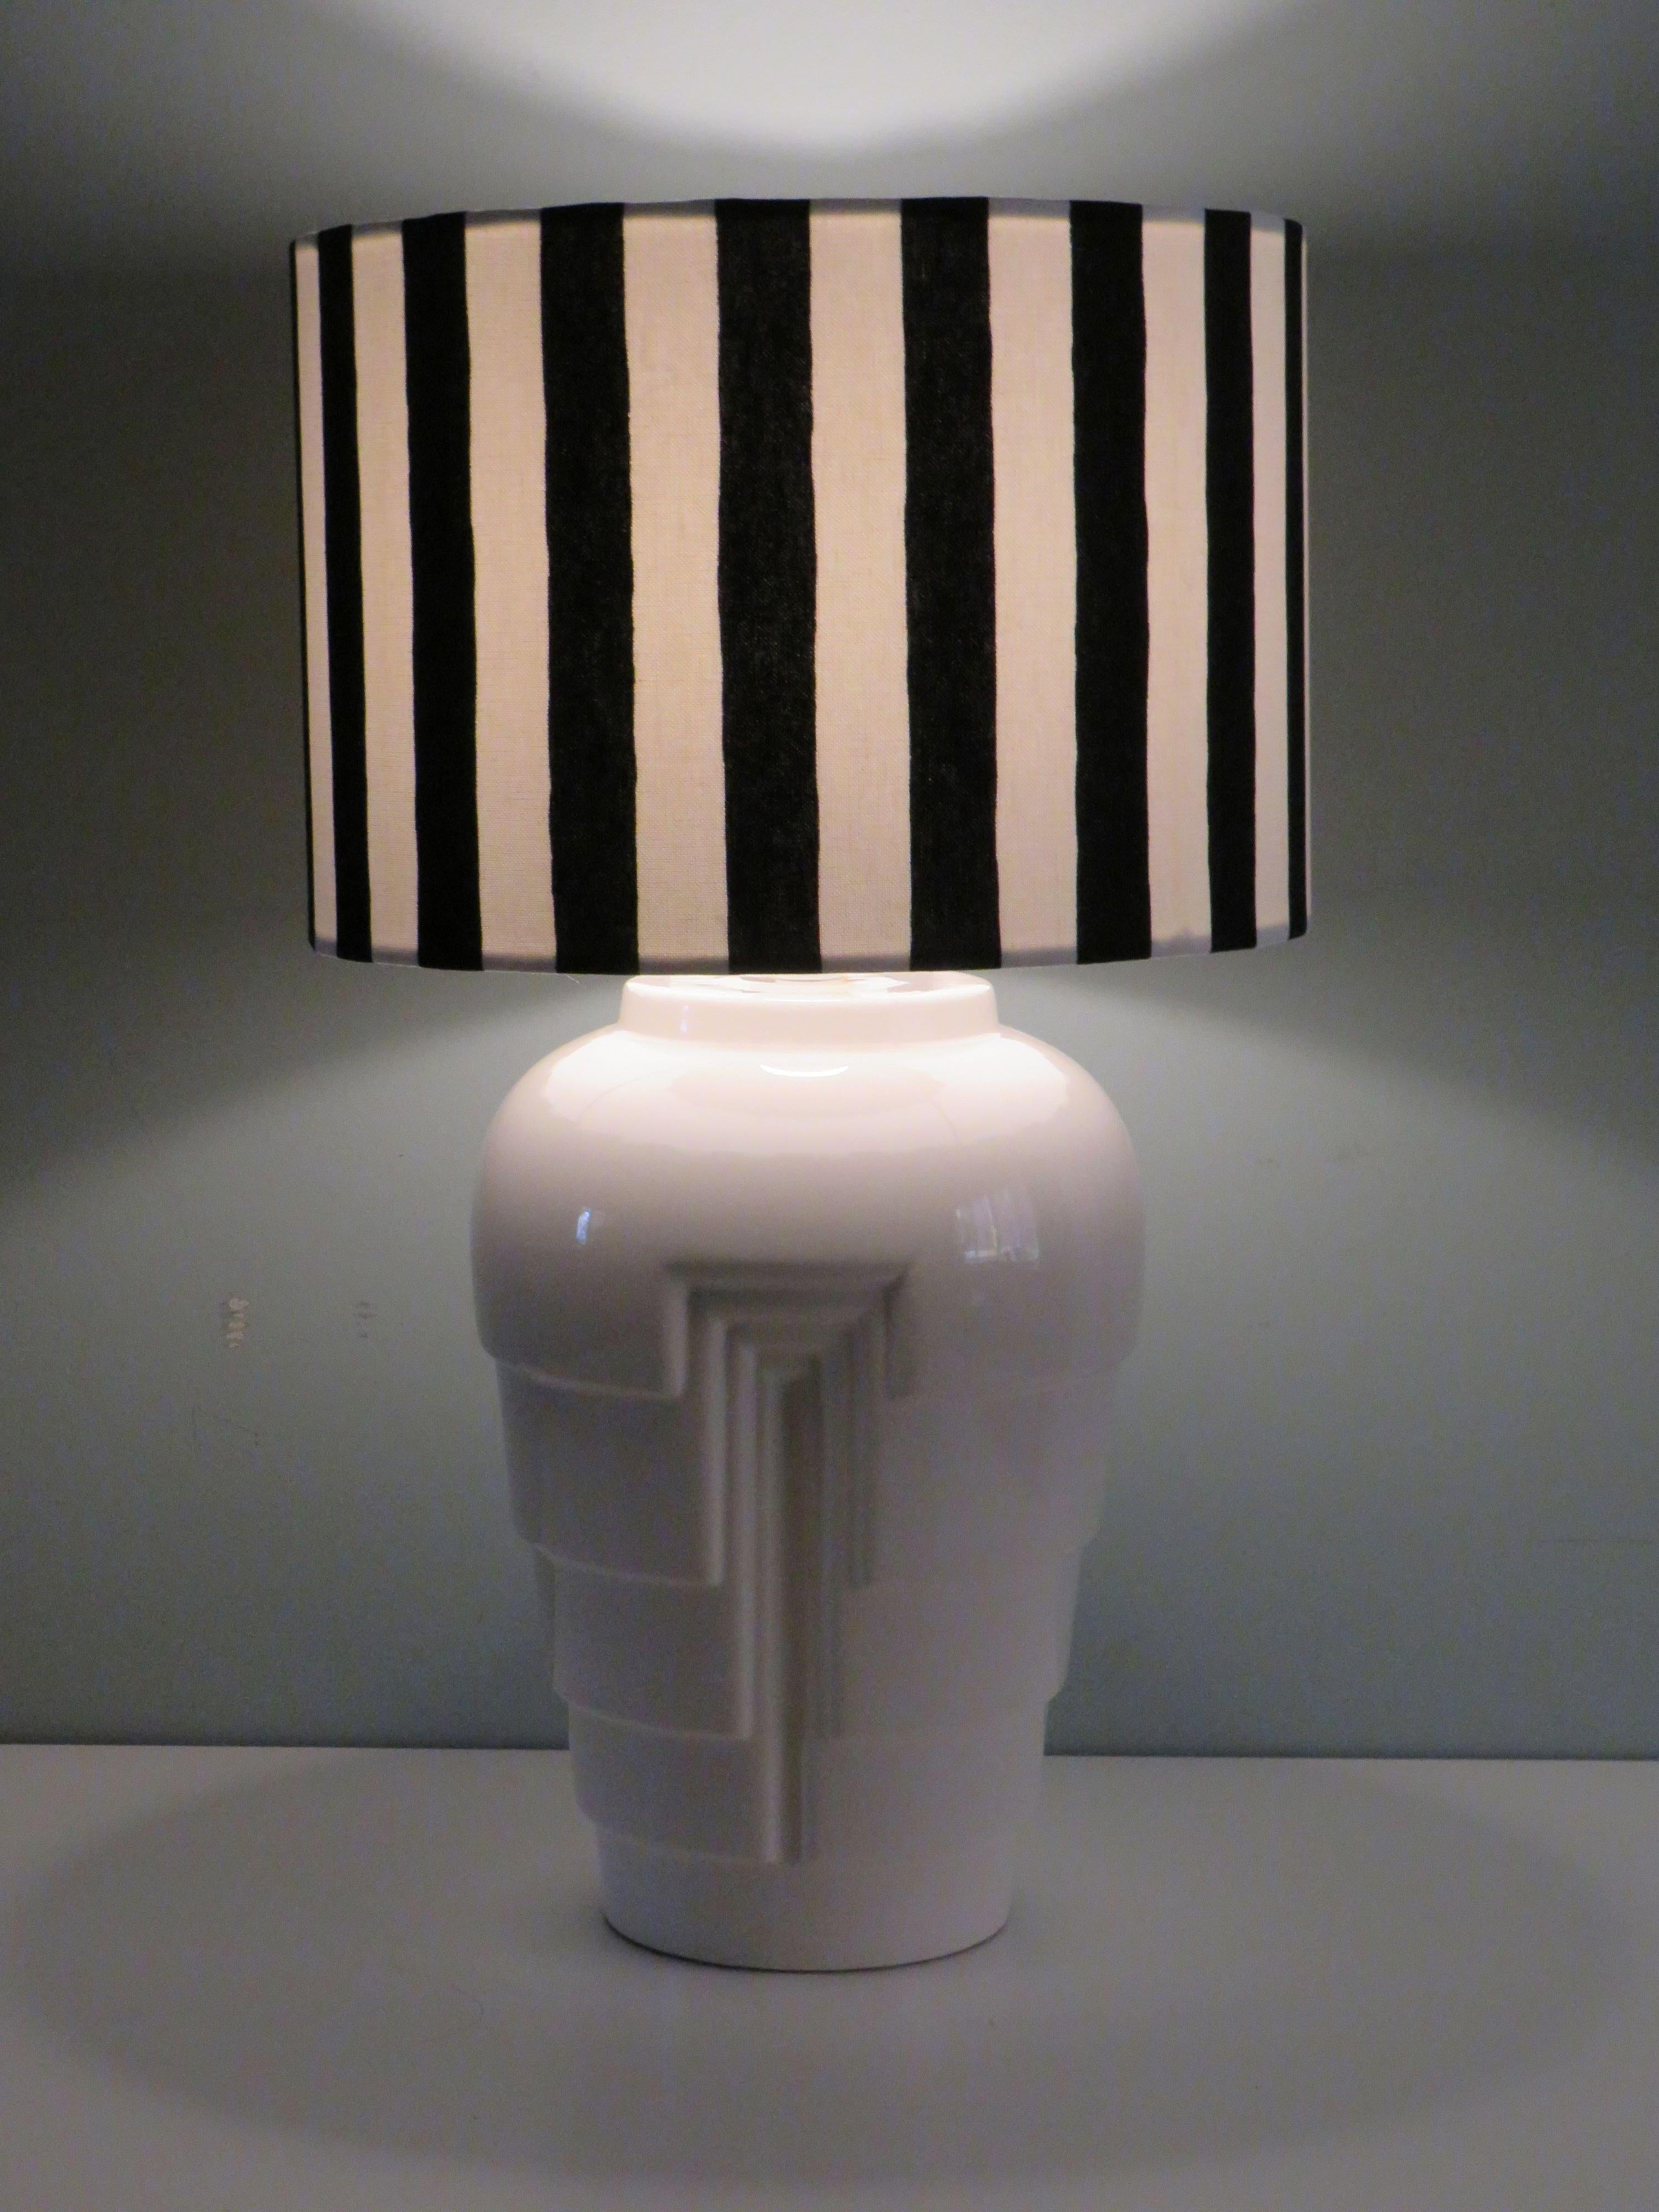 The white glazed lamp base features a skyscraper motif and a black and white striped custom-made lampshade.
The height of the lamp base is 35.5 cm. The maximum diameter is 21 cm.
The lampshade is covered with fabric from Ten Swedish Design, Radio Z